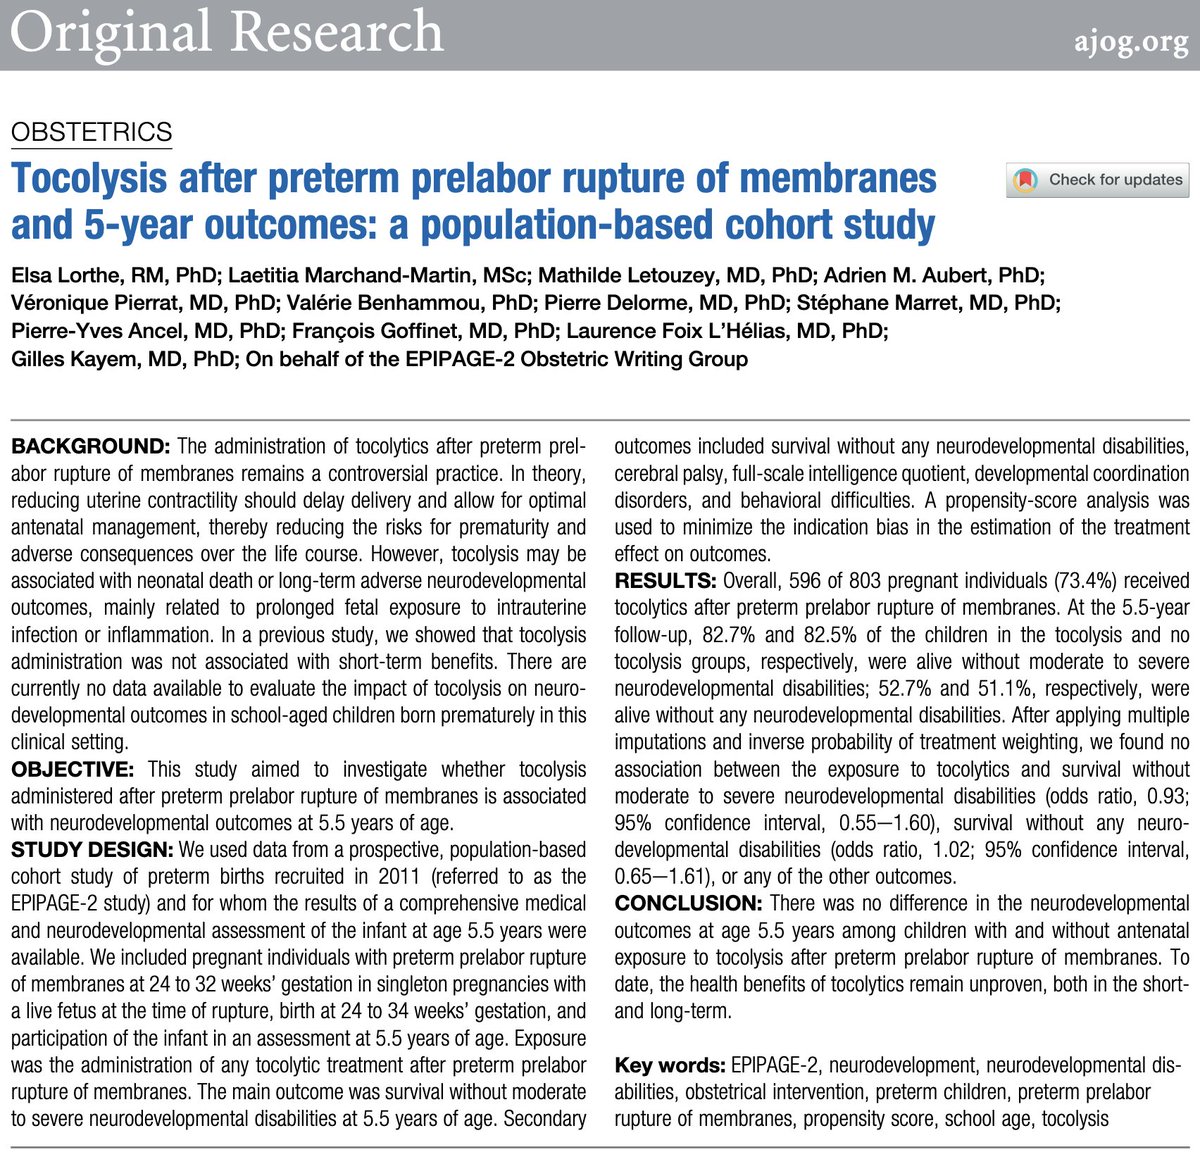 Tocolysis after preterm prelabor rupture of membranes and 5-year outcomes: a population-based cohort study ow.ly/kBGb50RShF0